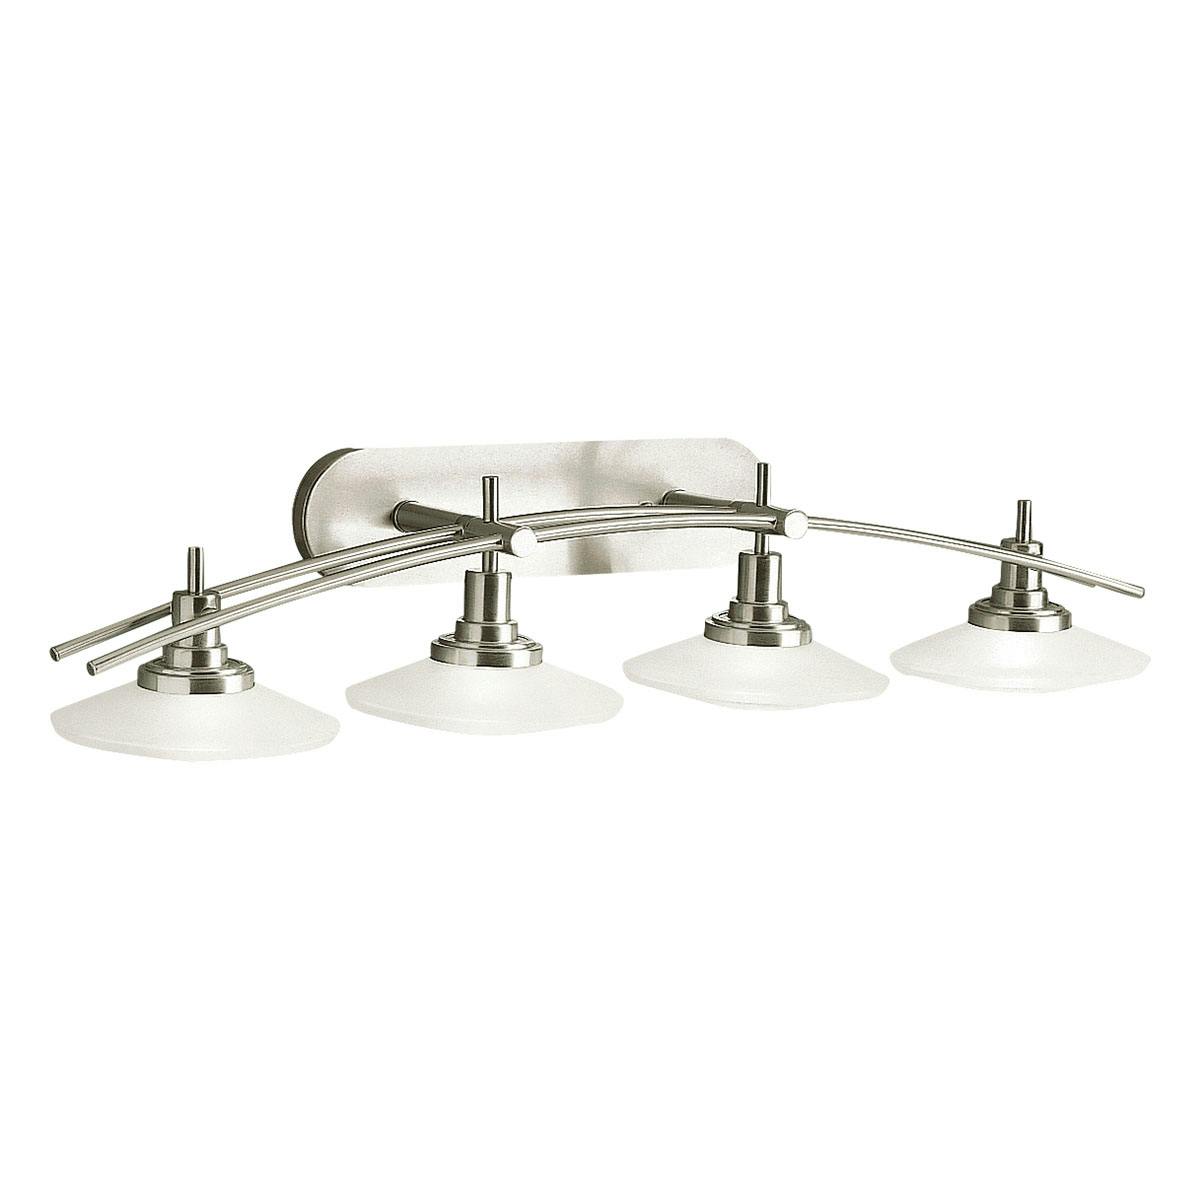 Structures 4 Light Vanity Light Nickel on a white background